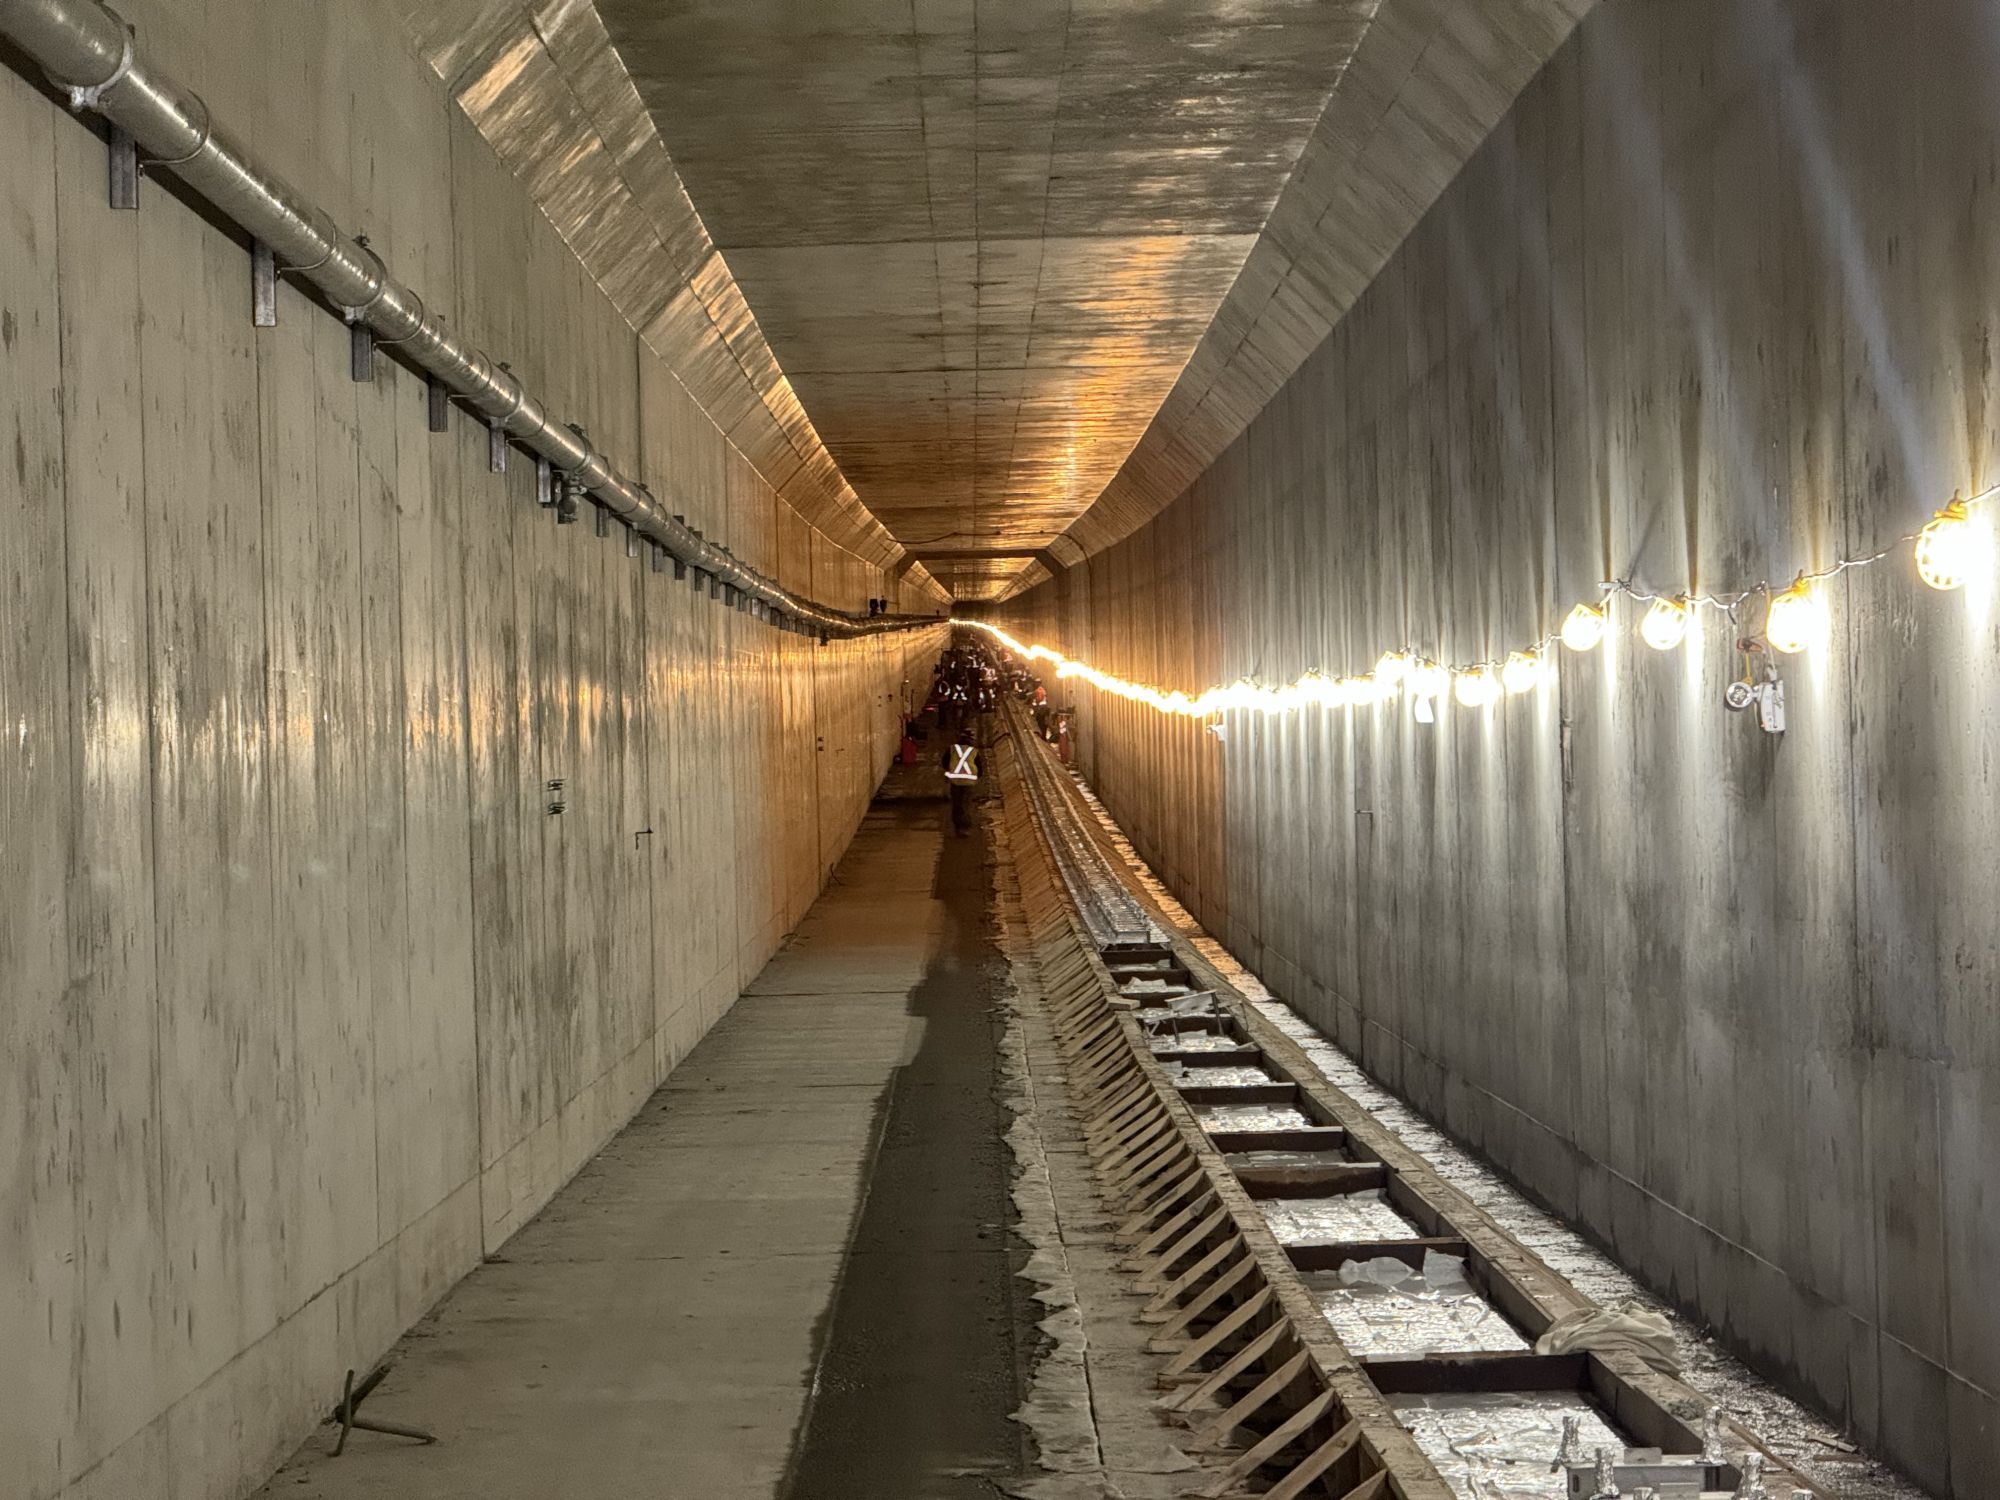 Behind the Scenes: Visiting the Kichi Zìbì Mìkan Tunnel and Sherbourne Station